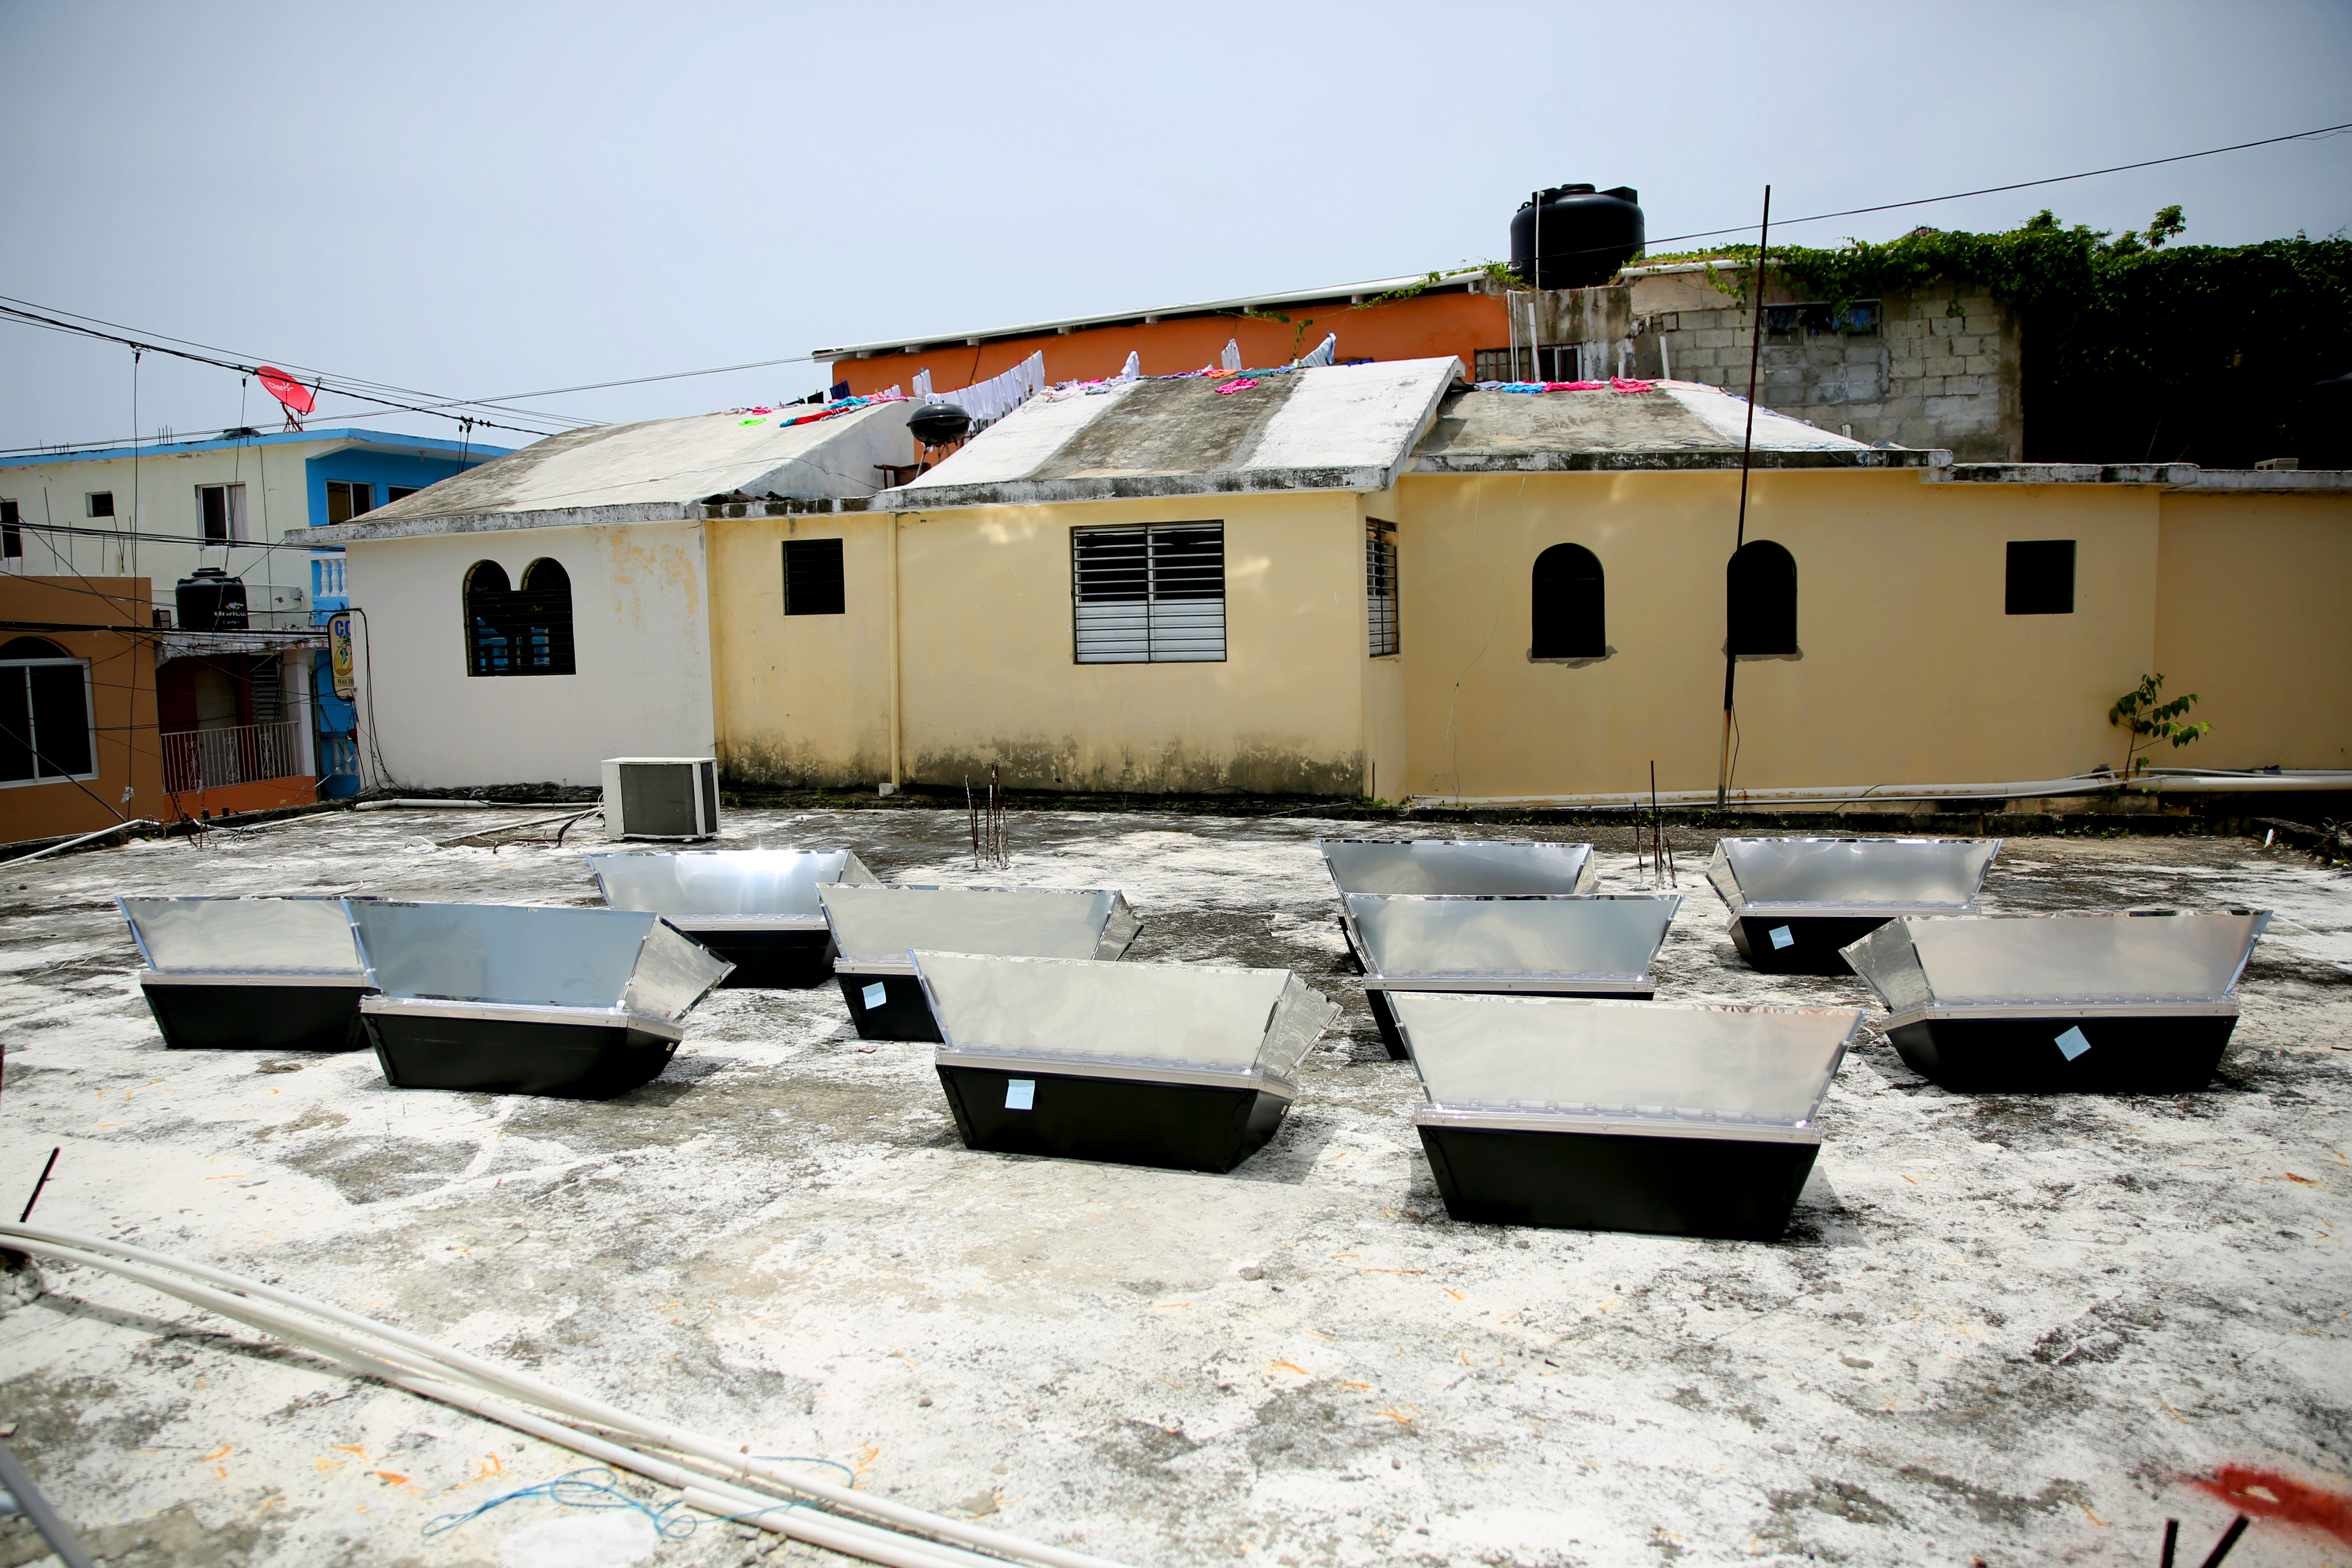 Ten solar ovens sit atop the Igelsia Evangelica Dominicana church roof in Sosua. Temperatures on the ovens need to reach more than 200 degrees Fahrenheit before cooking can start. Image by Makenzie Huber. Dominican Republic, 2016.